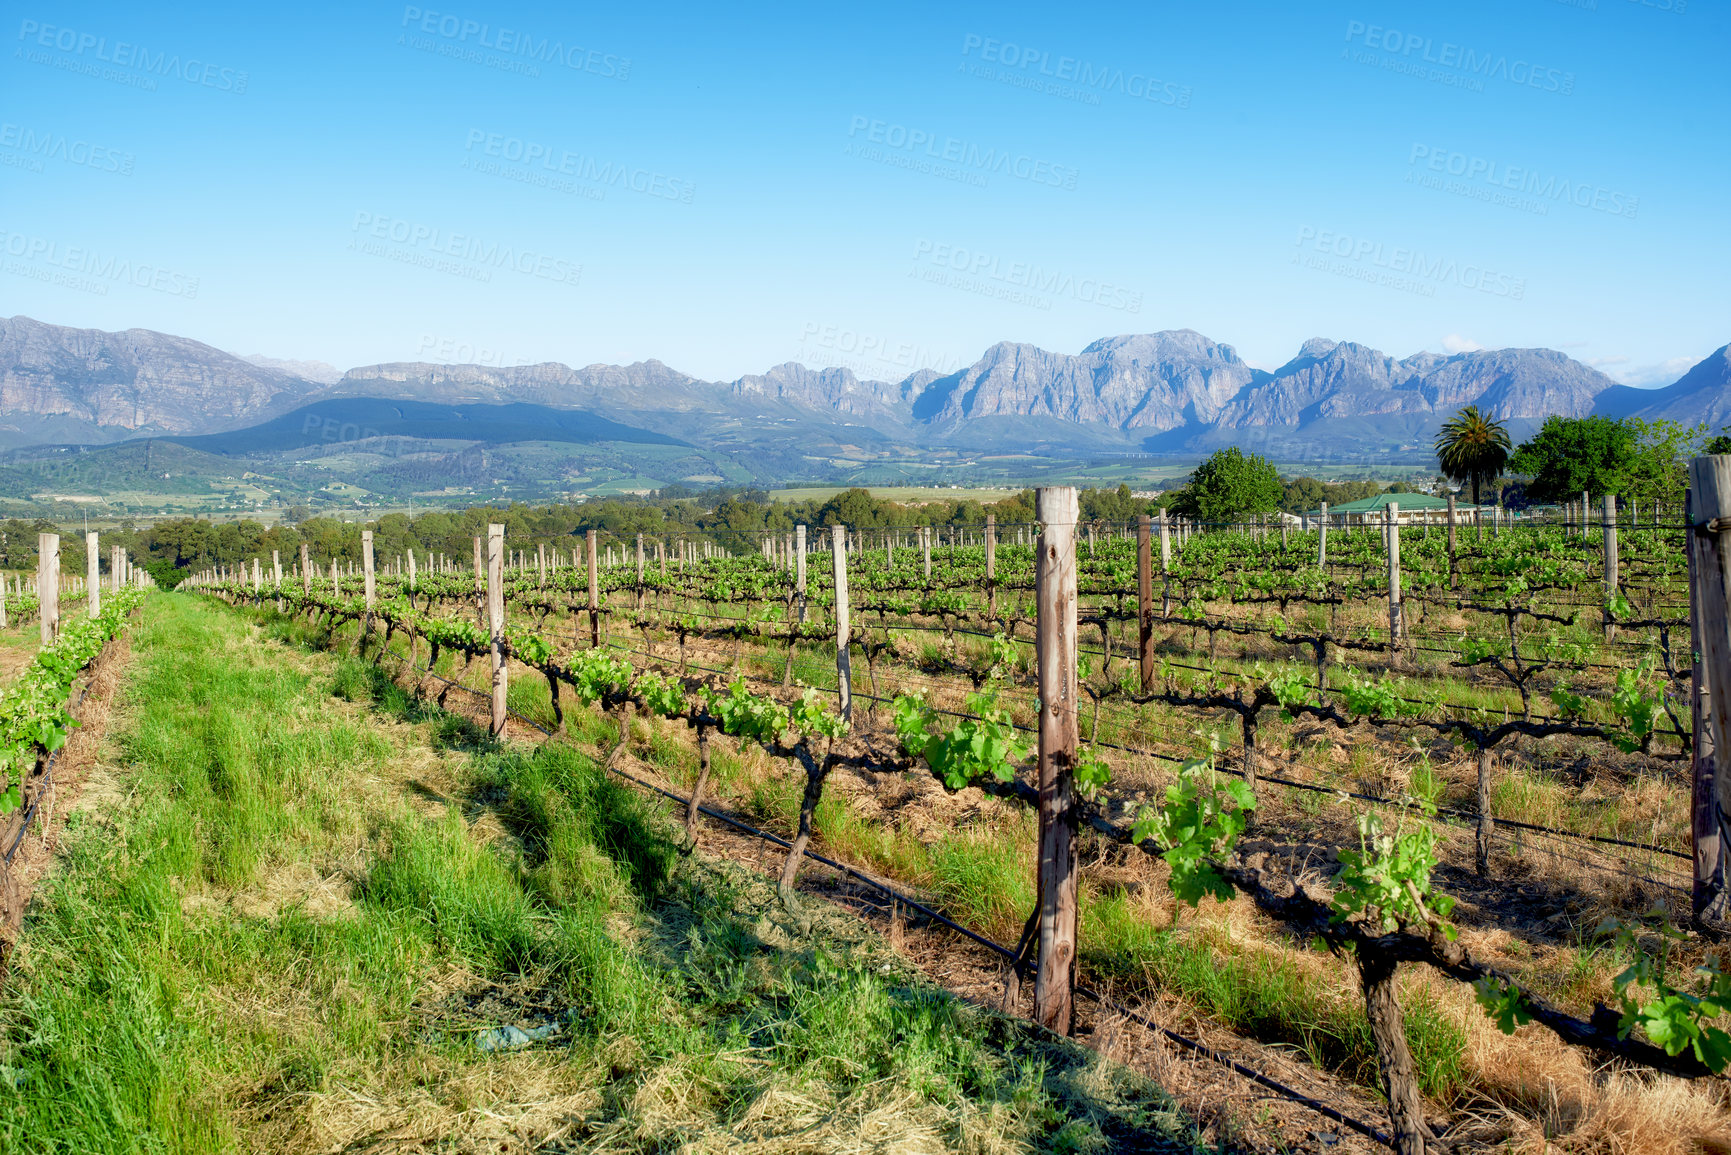 Buy stock photo Ecological organic vineyards of the Stellenbosch district, Western Cape Province, South Africa. Closeup of multiple rows of vines growing on sustainable a farm with mountains on a scenic background